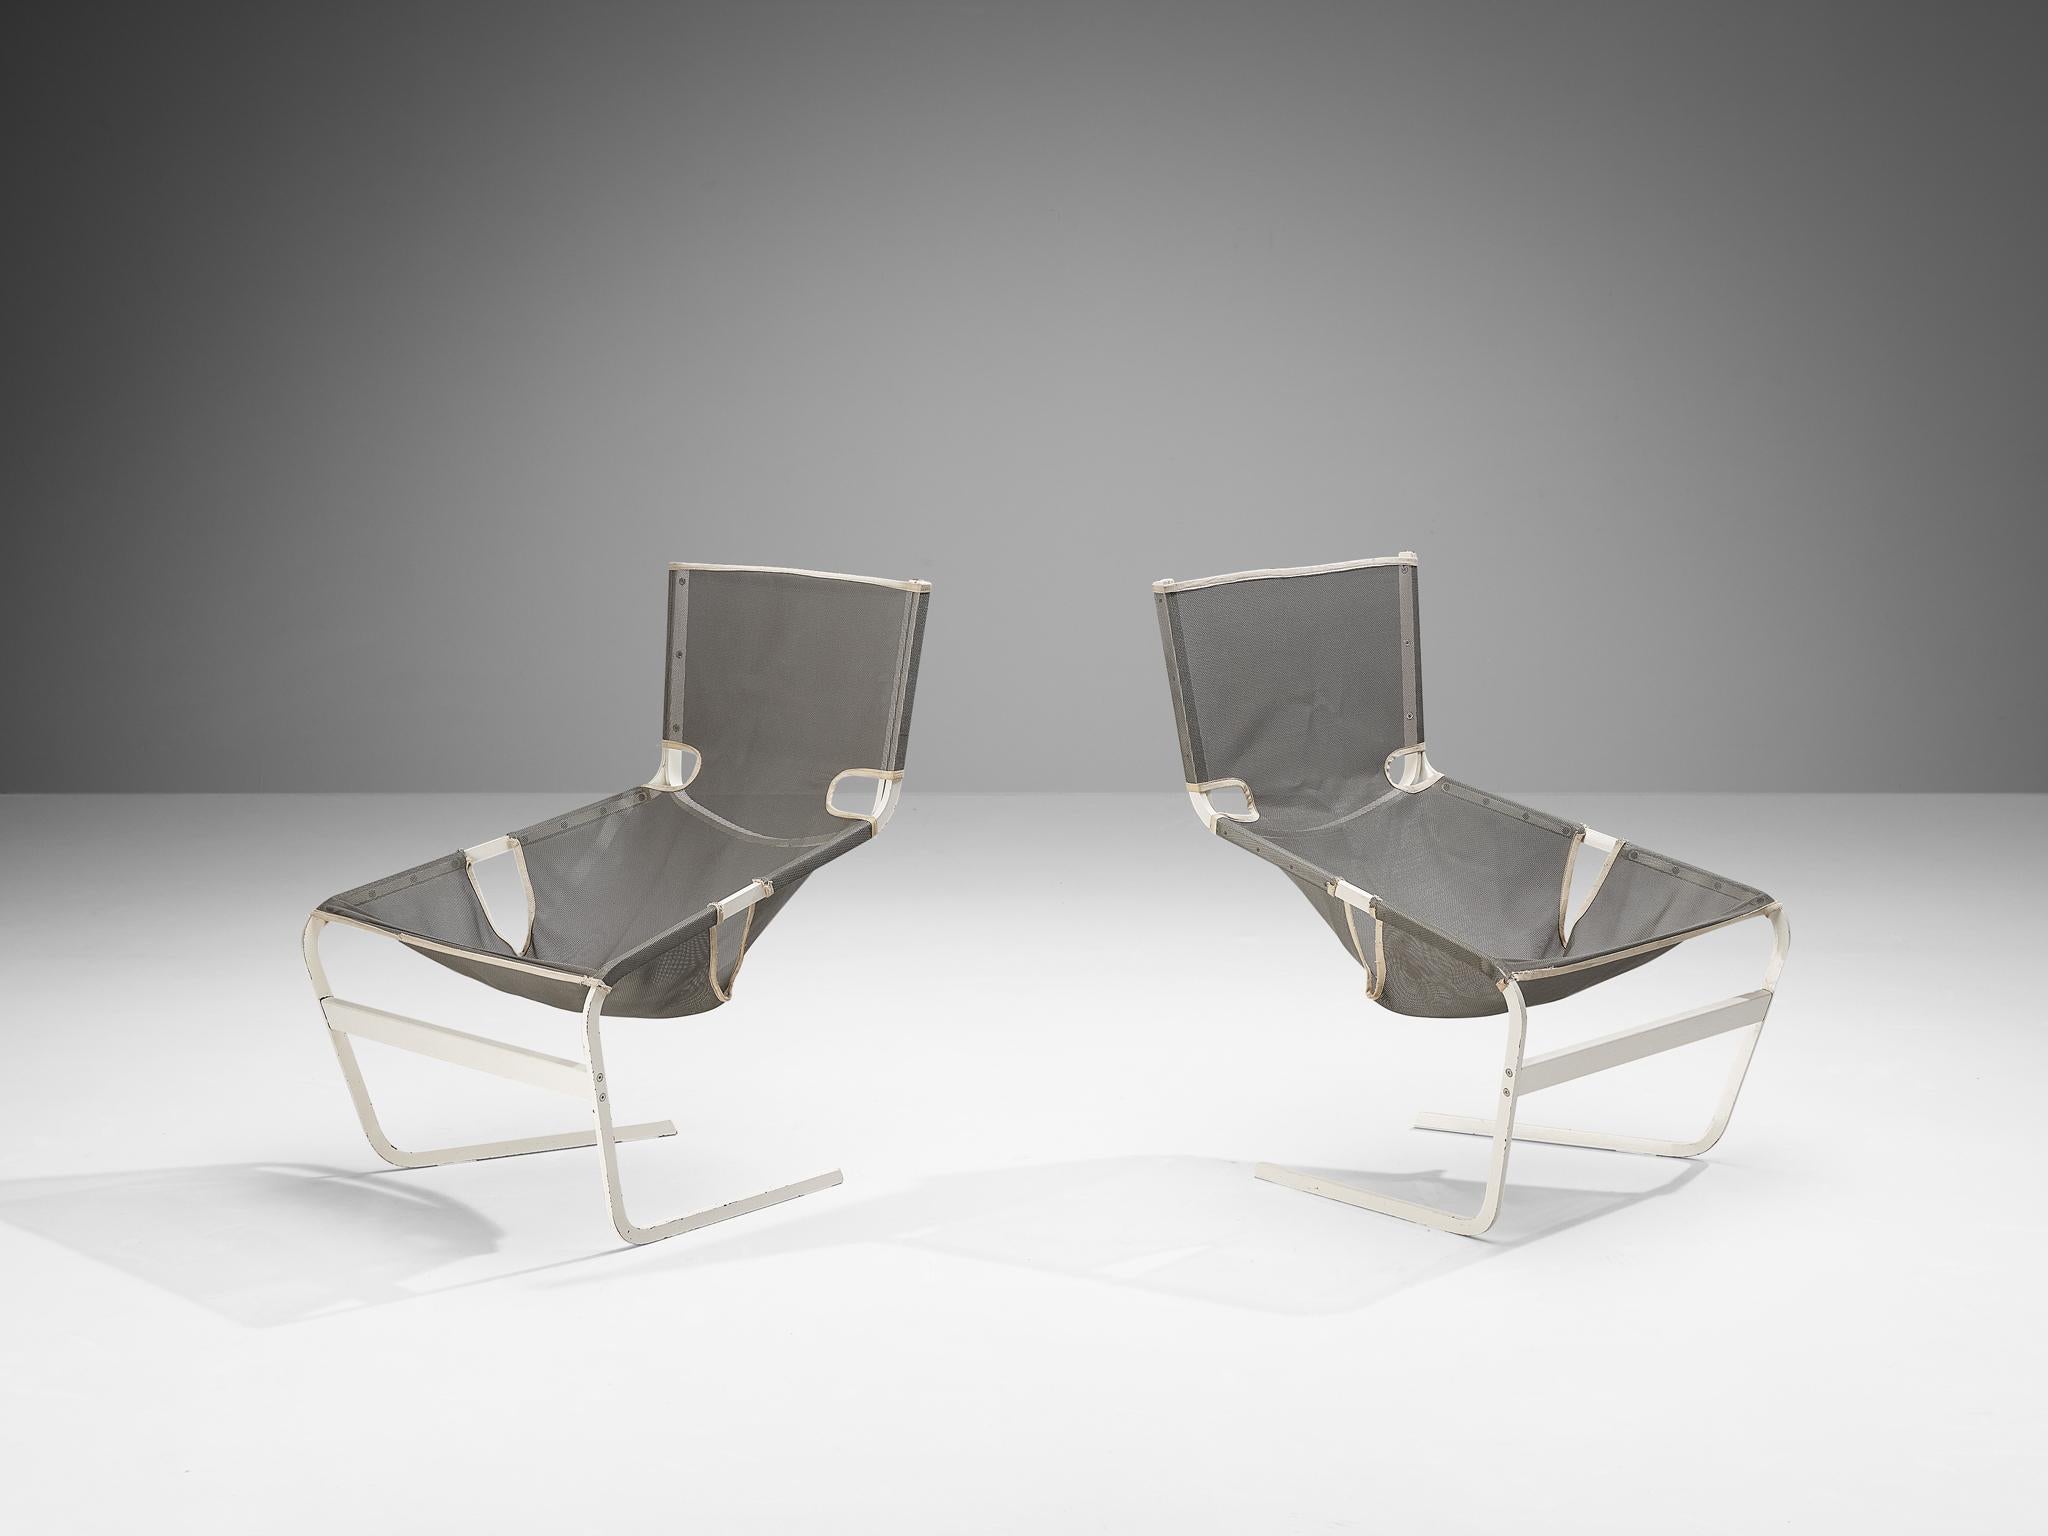 Pair of easy chairs by Pierre Paulin, pair of lounge chairs, model F-444, white metal and mesh, The Netherlands, circa 1962

This pair of mesh F-444 chairs is designed by Pierre Paulin for Artifort in 1962. This chair shows sharp lines and features